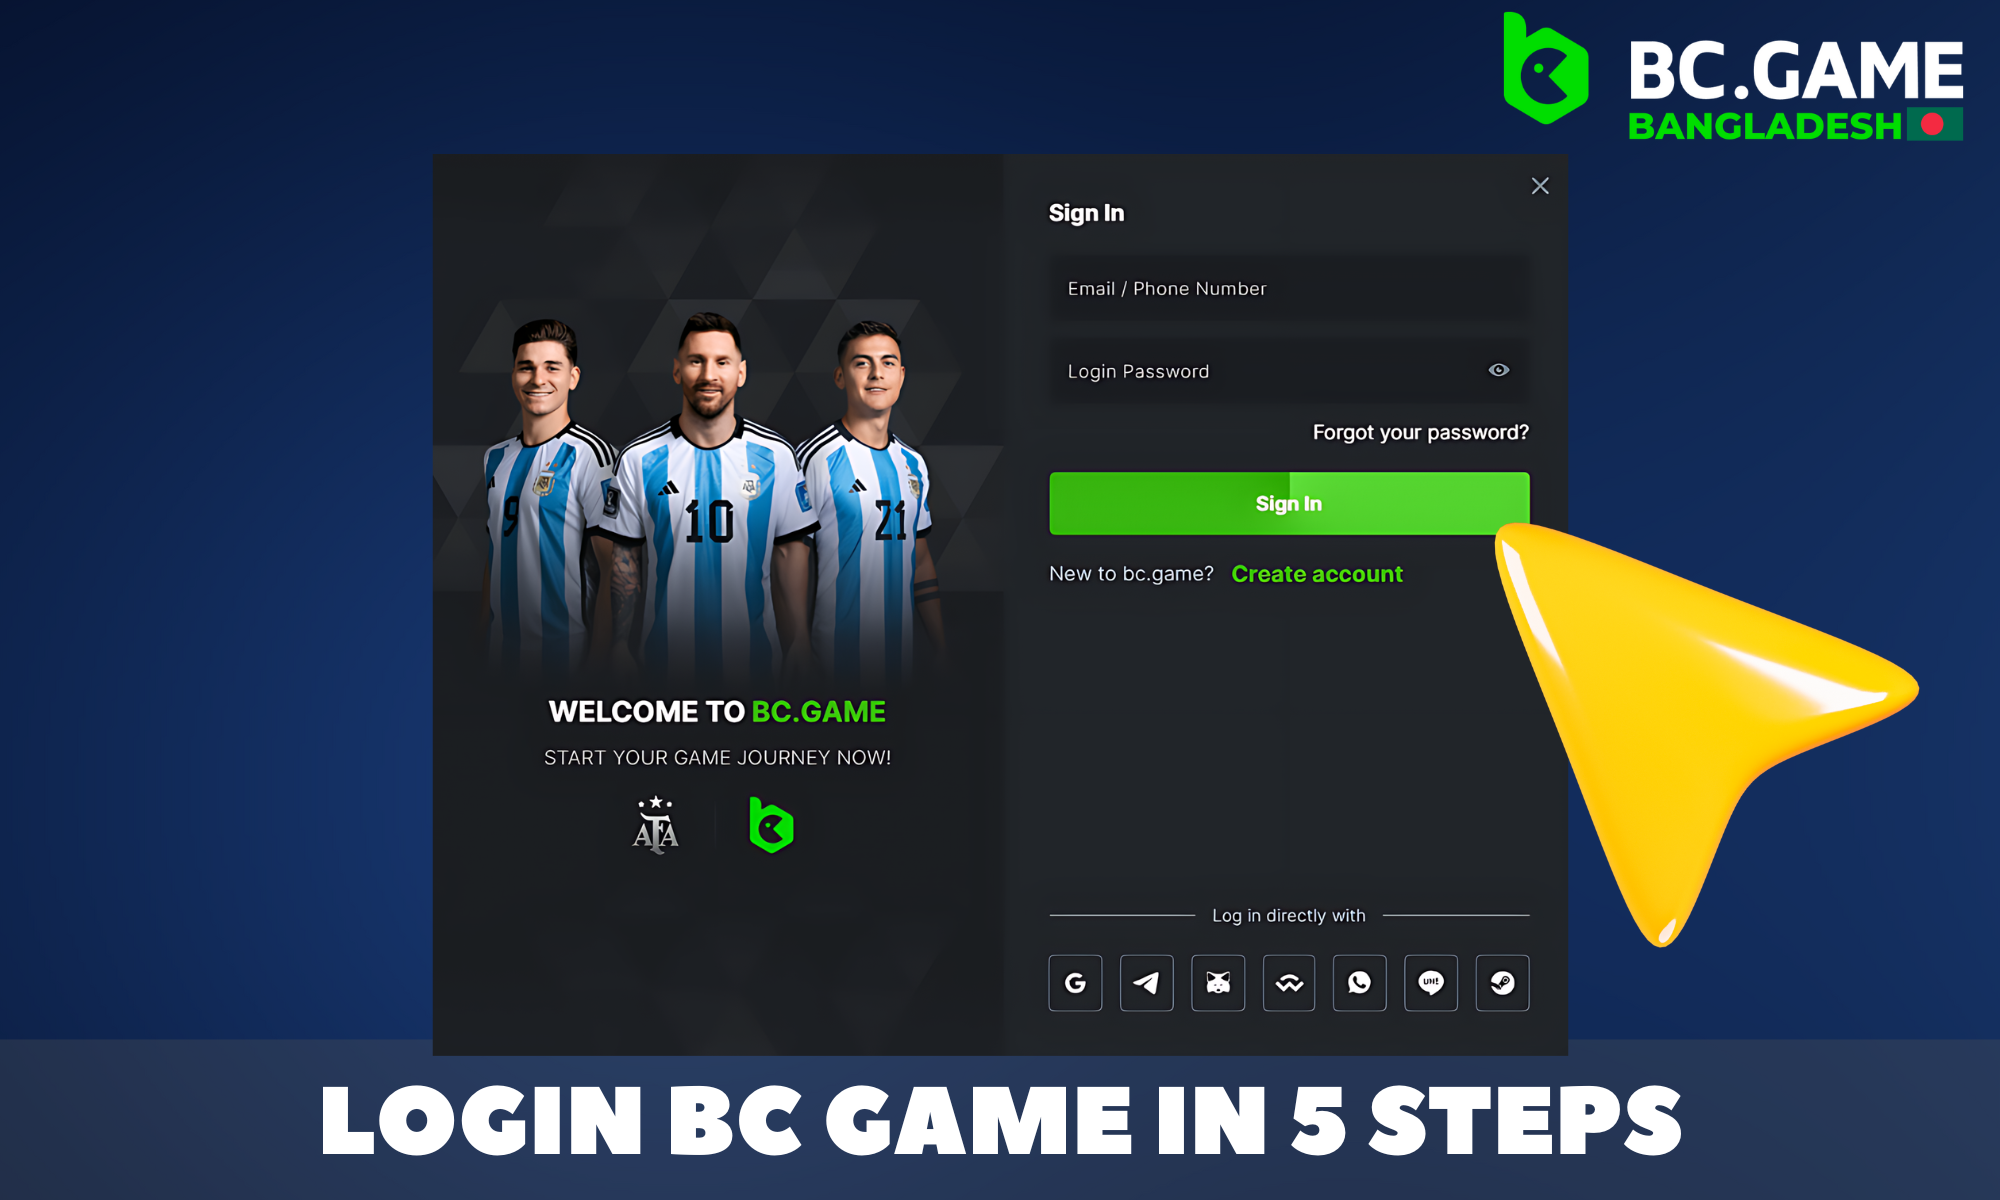 How to log in to your BC.Game account, step-by-step instructions